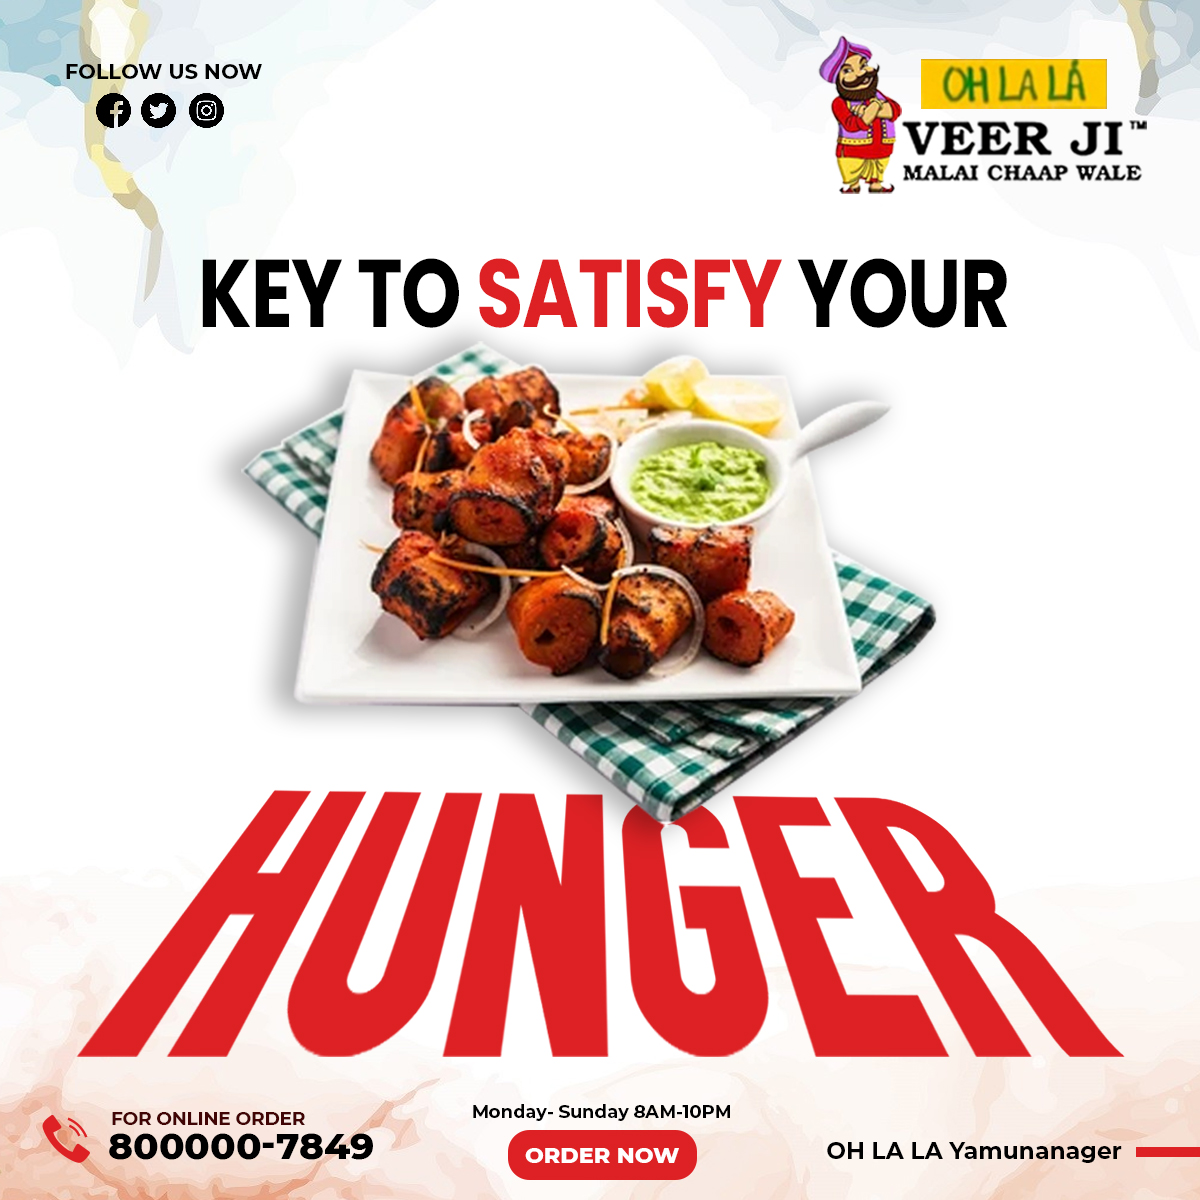 It's time to stop your hunger...The key to delighting your hunger is a cheap treat...

To explore more, please 😍Visit us for food👇👇
@ChaapWaley

📞For online food & delivery - 8000007849

#veerjimalaichaapwale #satisfaction #hunger #yamunanagar #jjagadhri #malaichaap